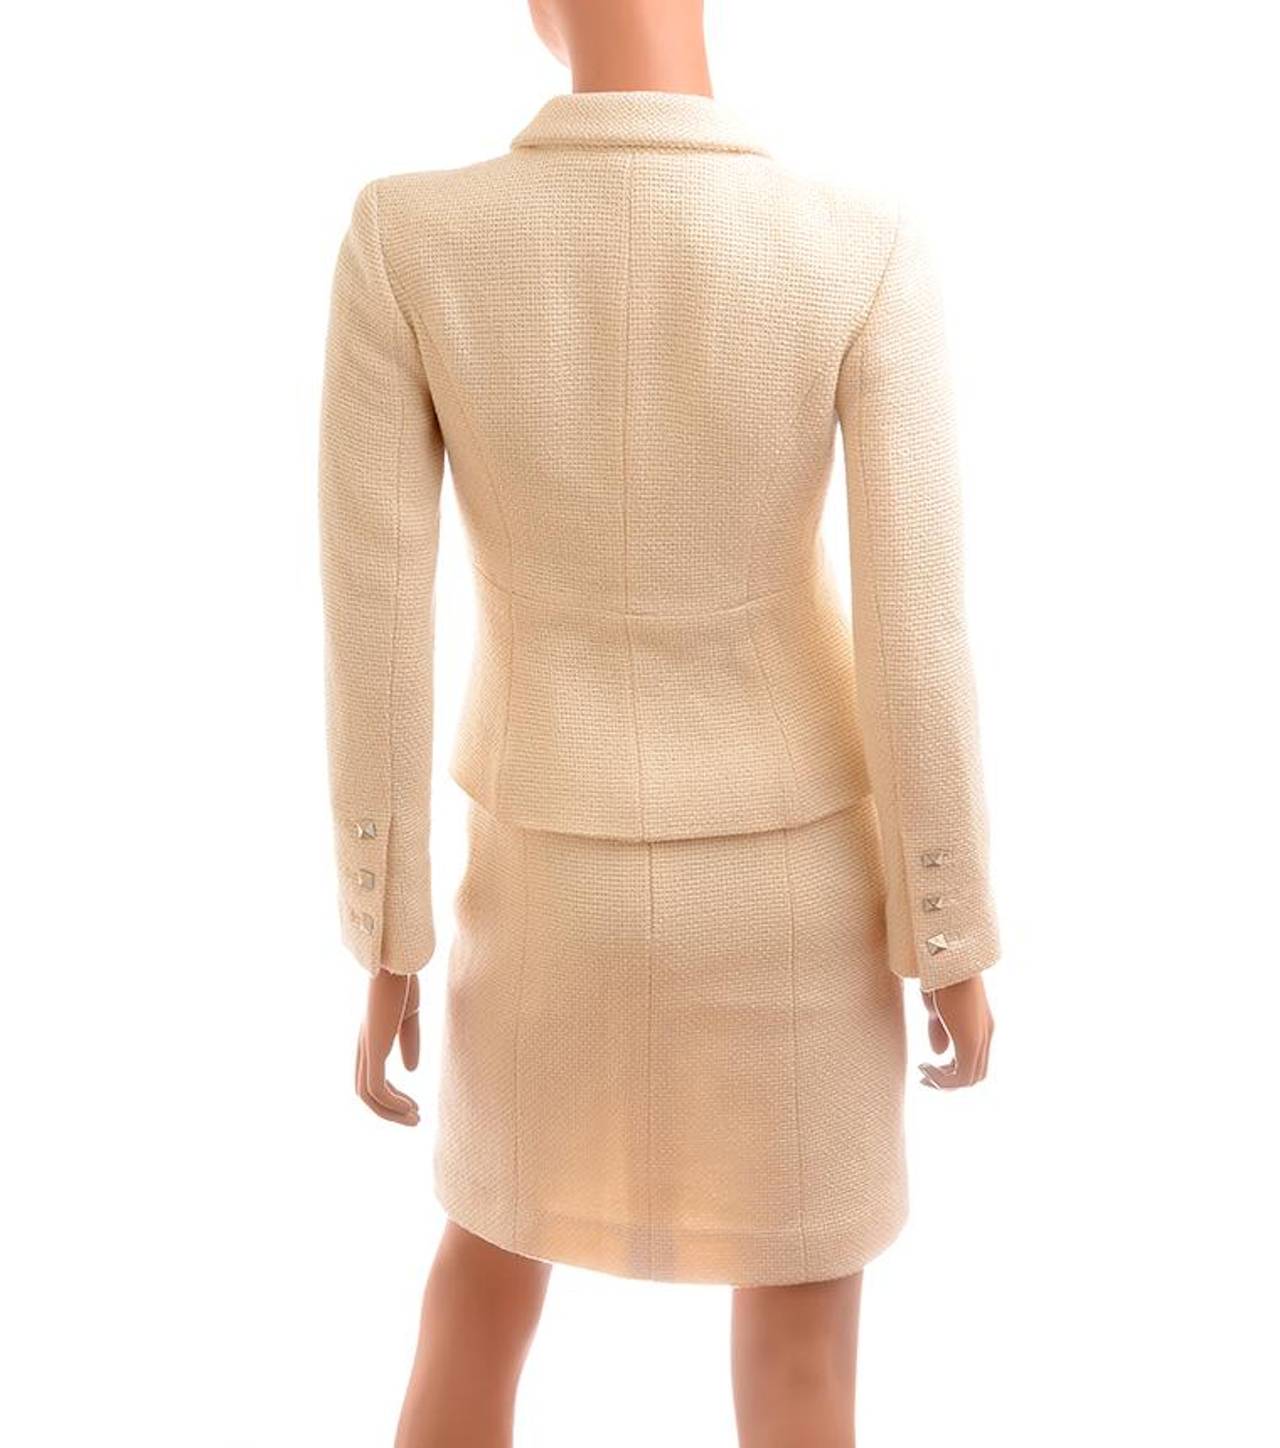 Chanel 03A Pyramid Button Cream Boucle Skirt Suit Fr 34 US 2 In Excellent Condition For Sale In New York, NY